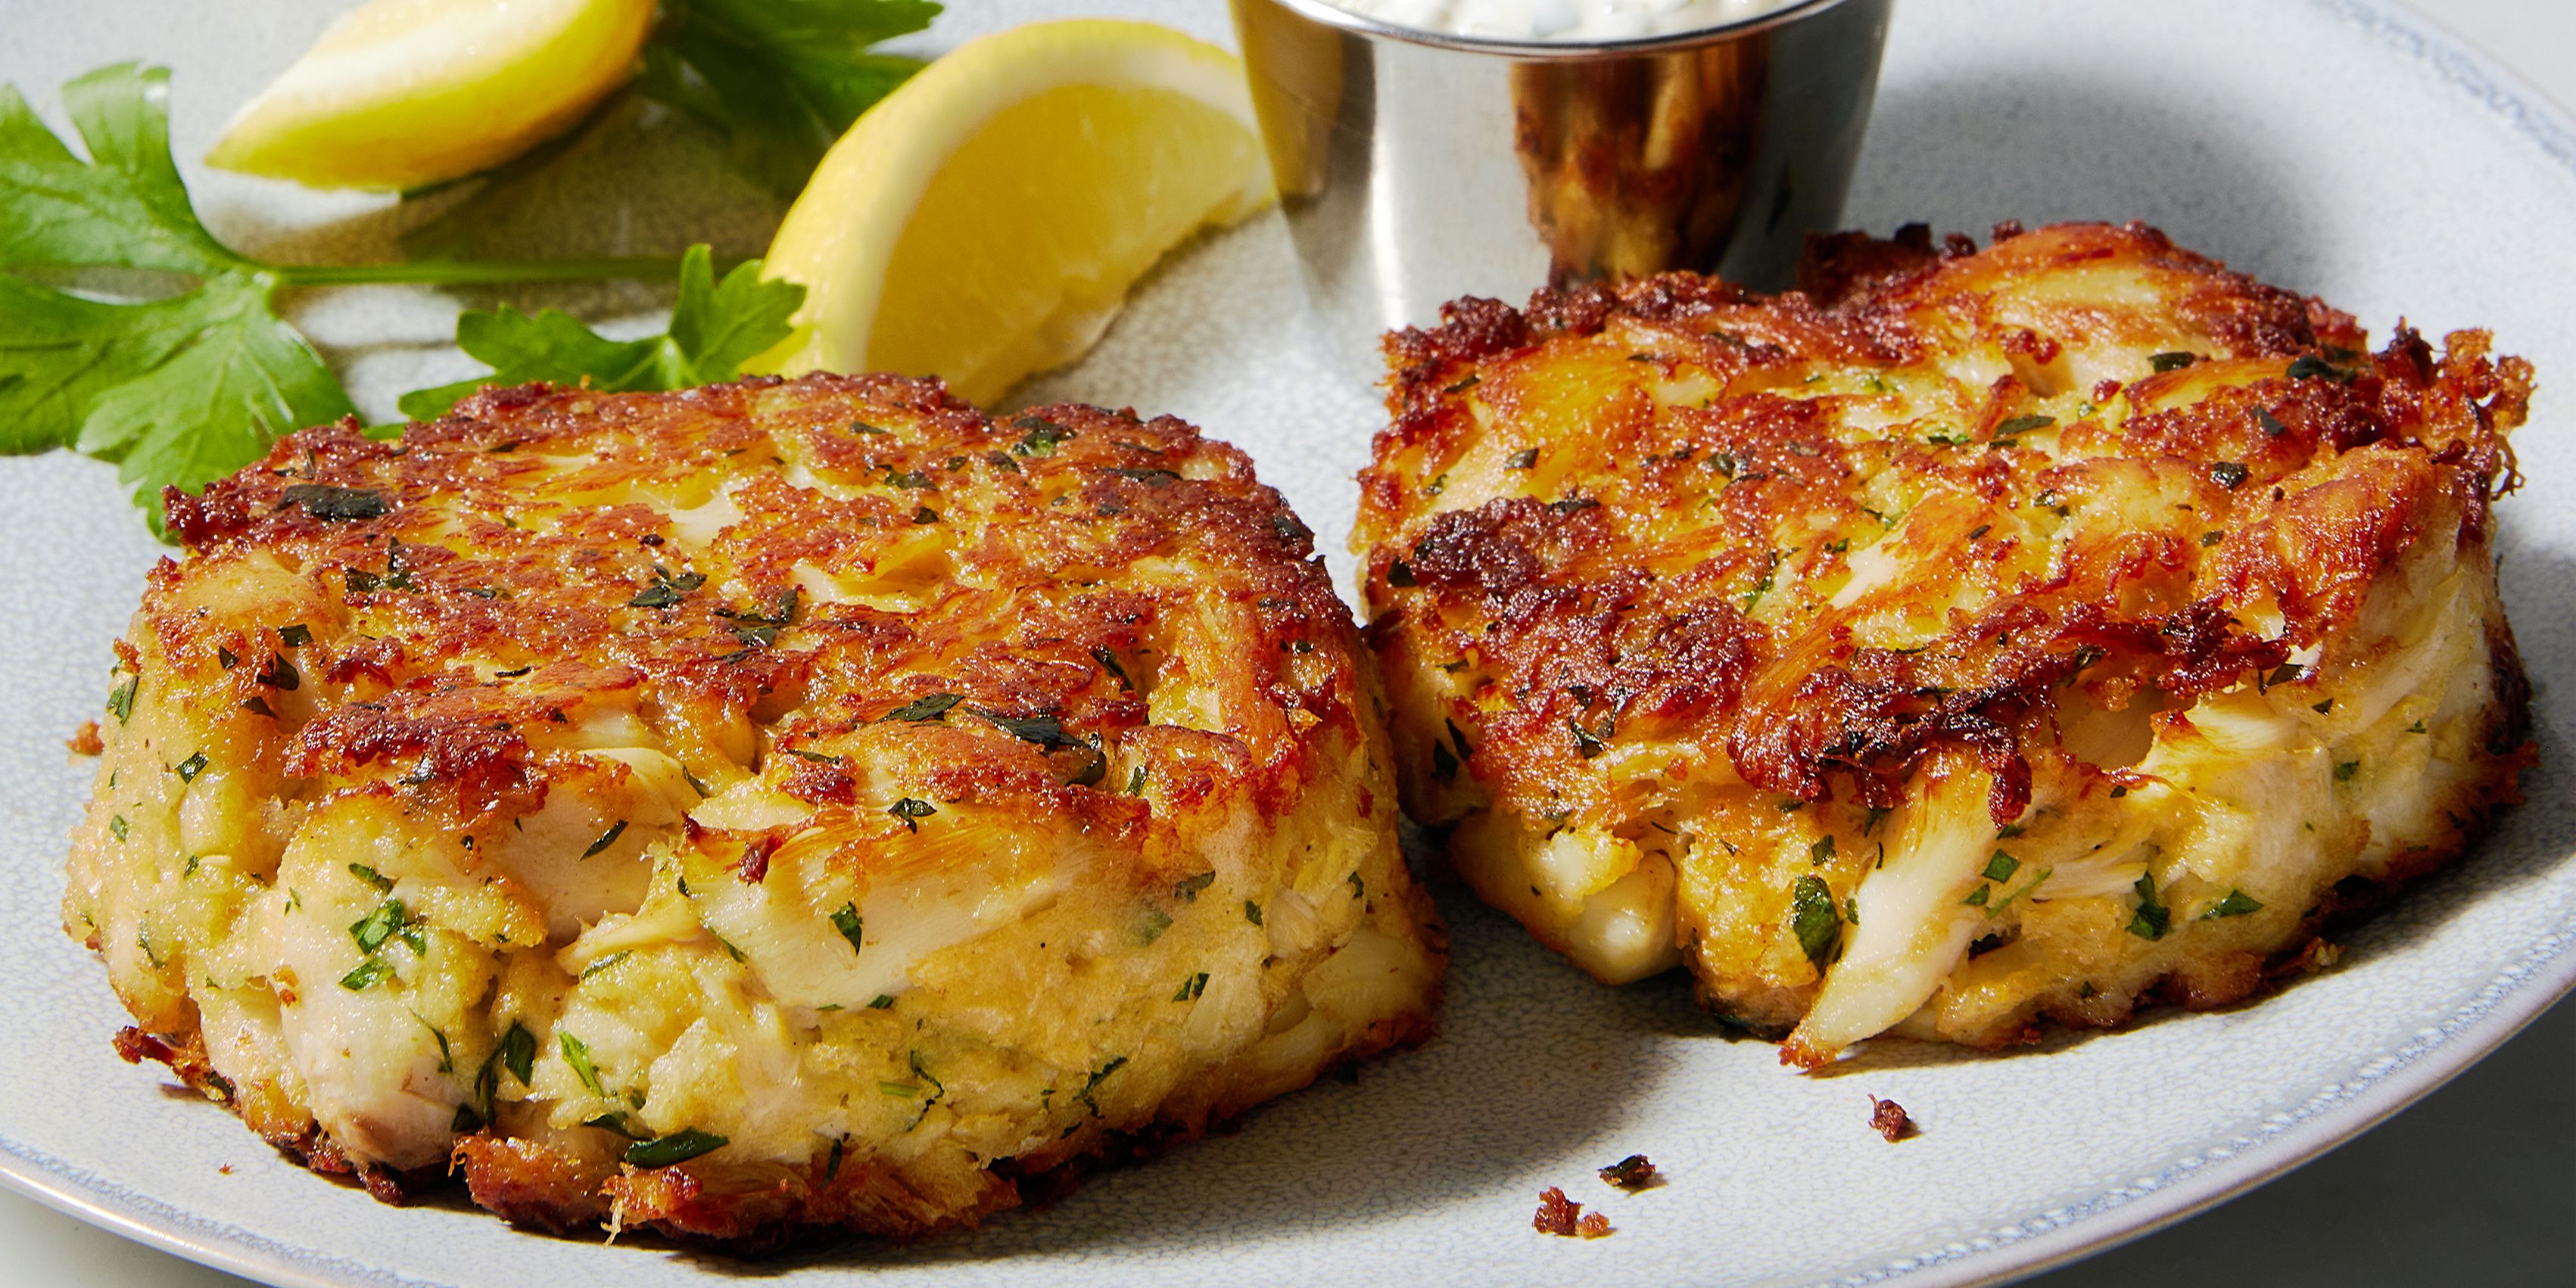 Chesapeake Blue Crab Cakes with Fried Oysters Recipe